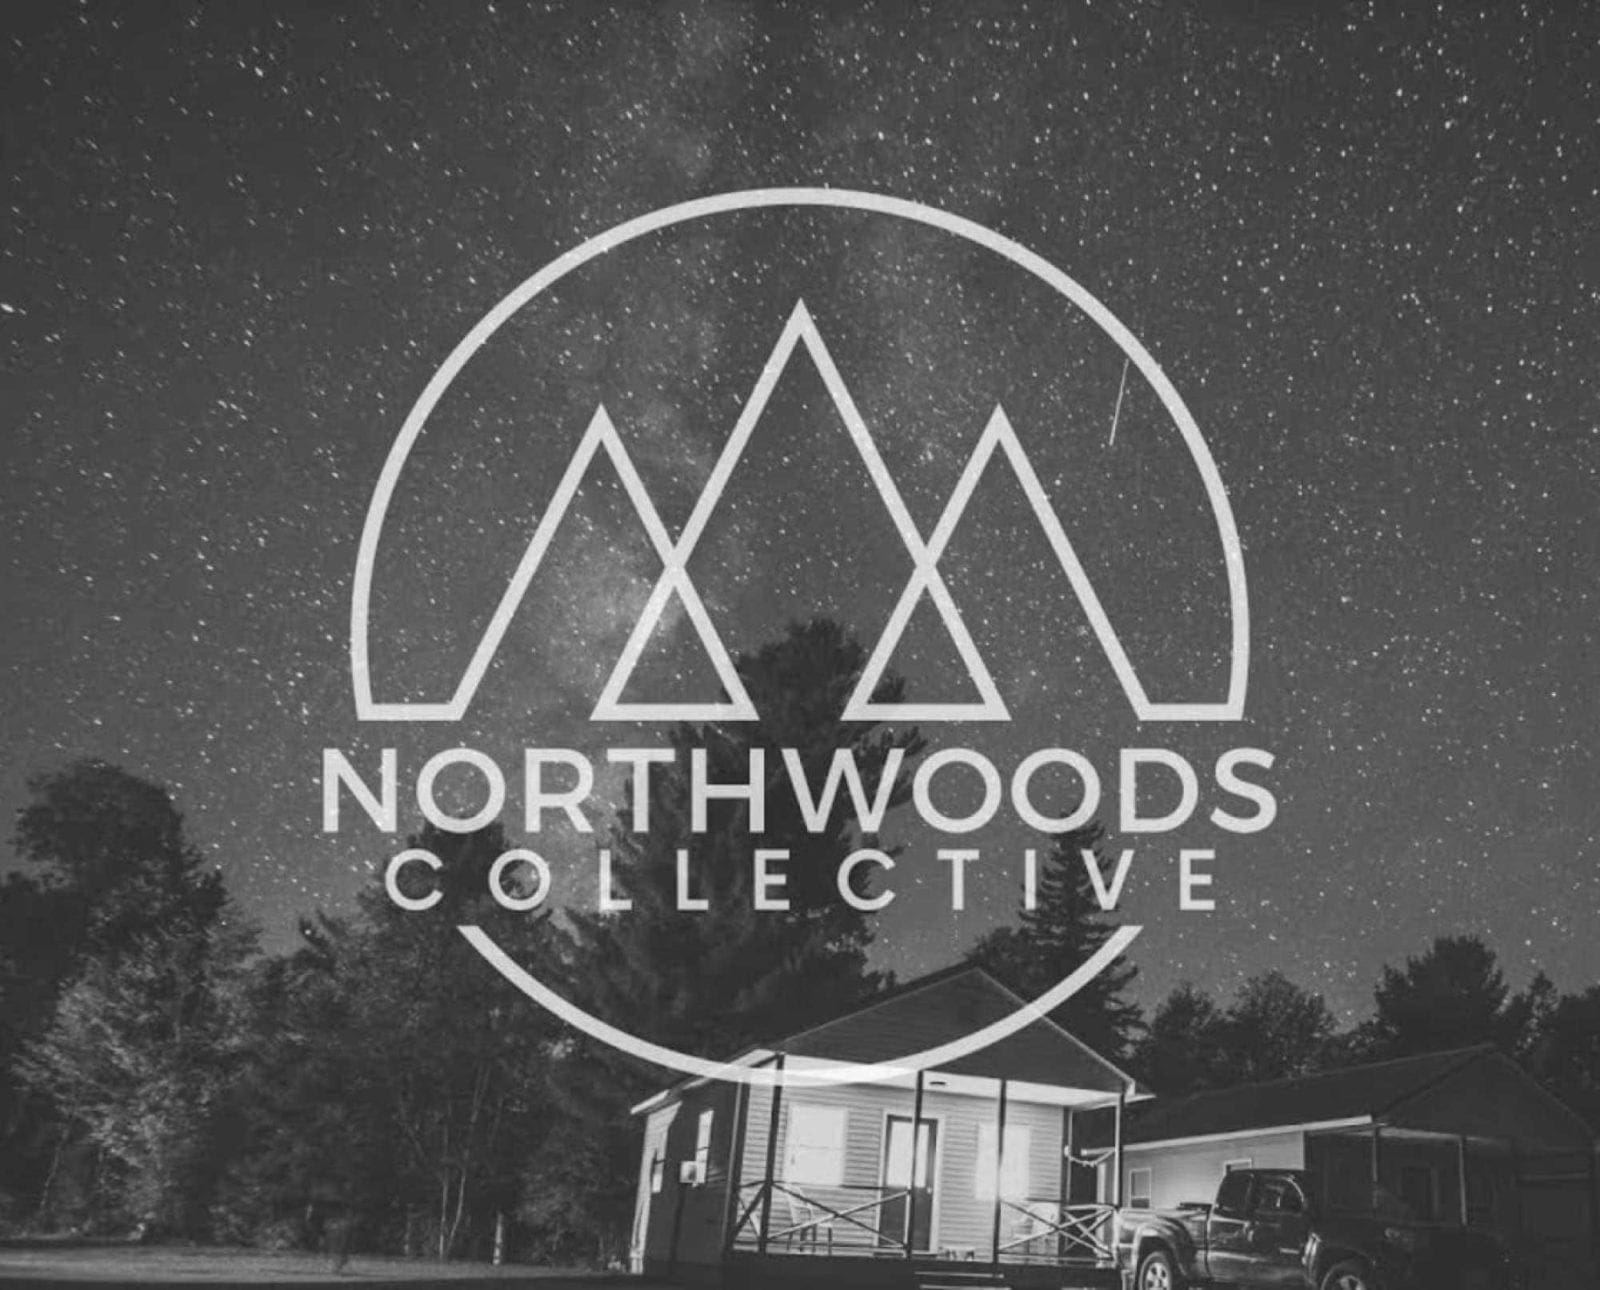 The Northwoods Collective logo over a star scape.